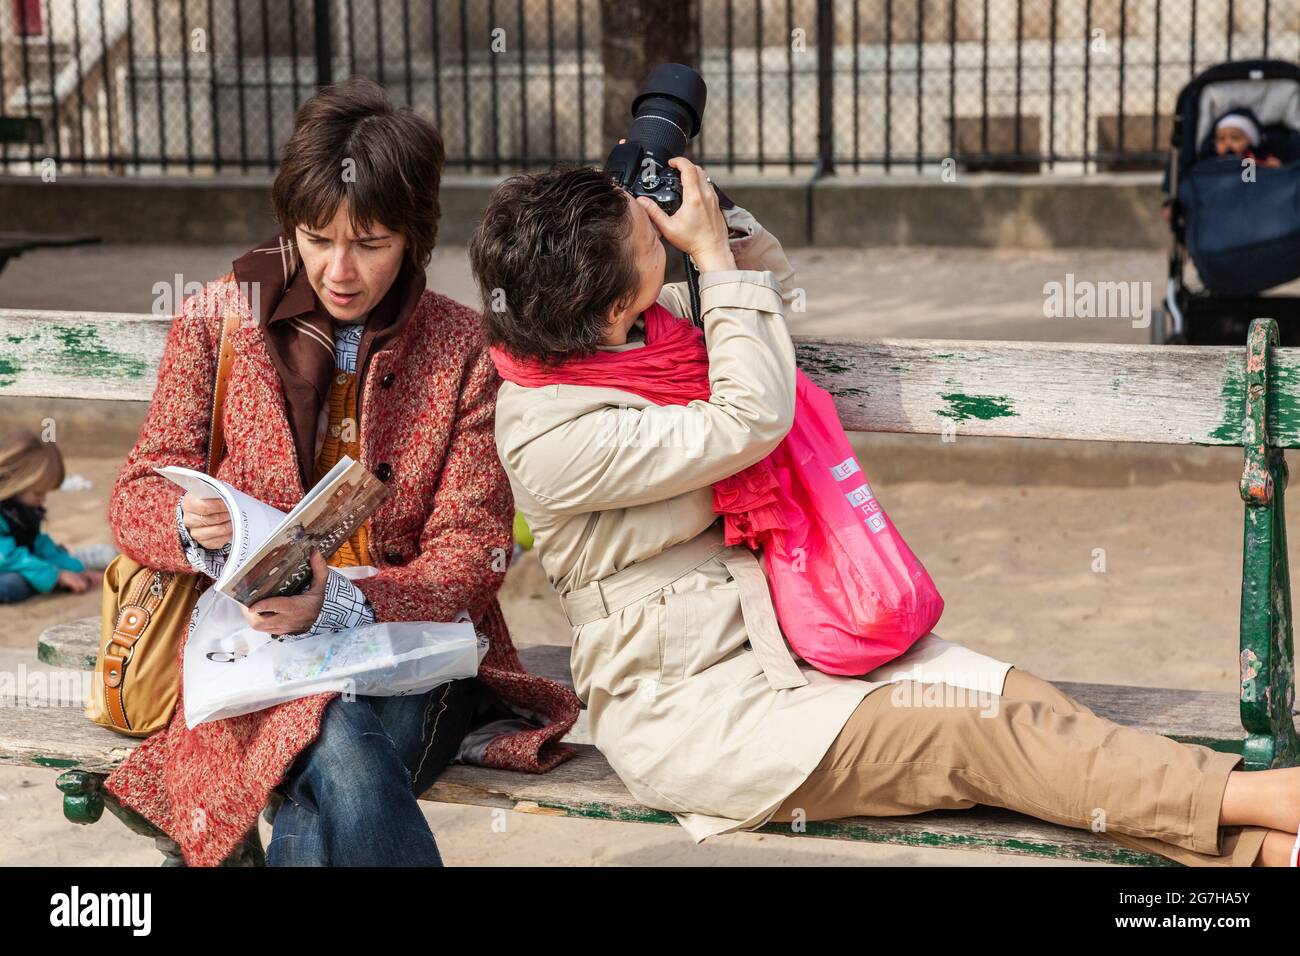 Two ladies seated on a bench, one leafing through a book, the other photographing. Paris, France Stock Photo